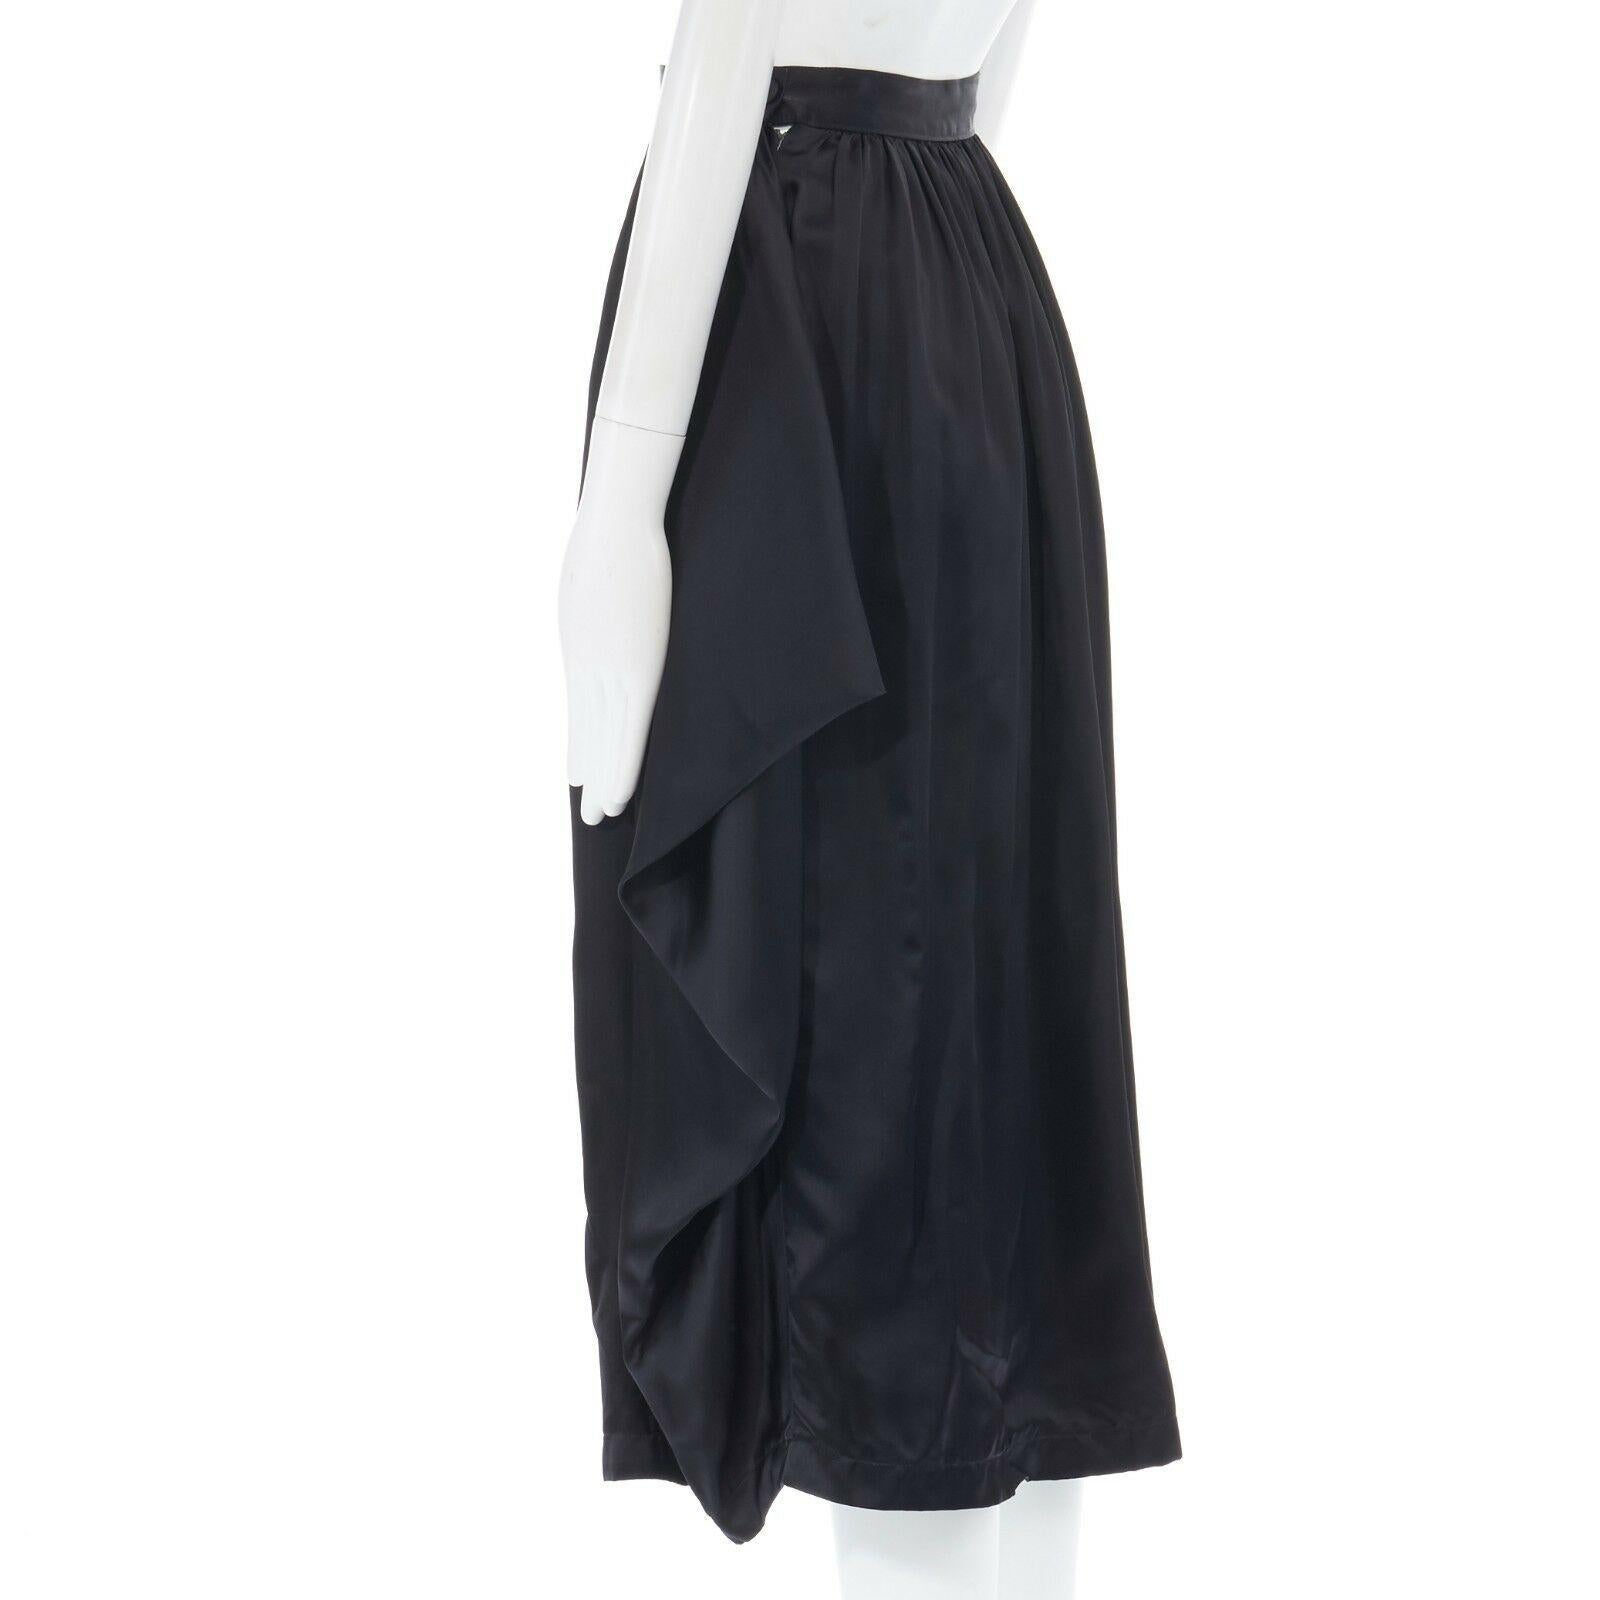 COMME DES GARCONS AD1989 black rayon draped knee length skirt S 24